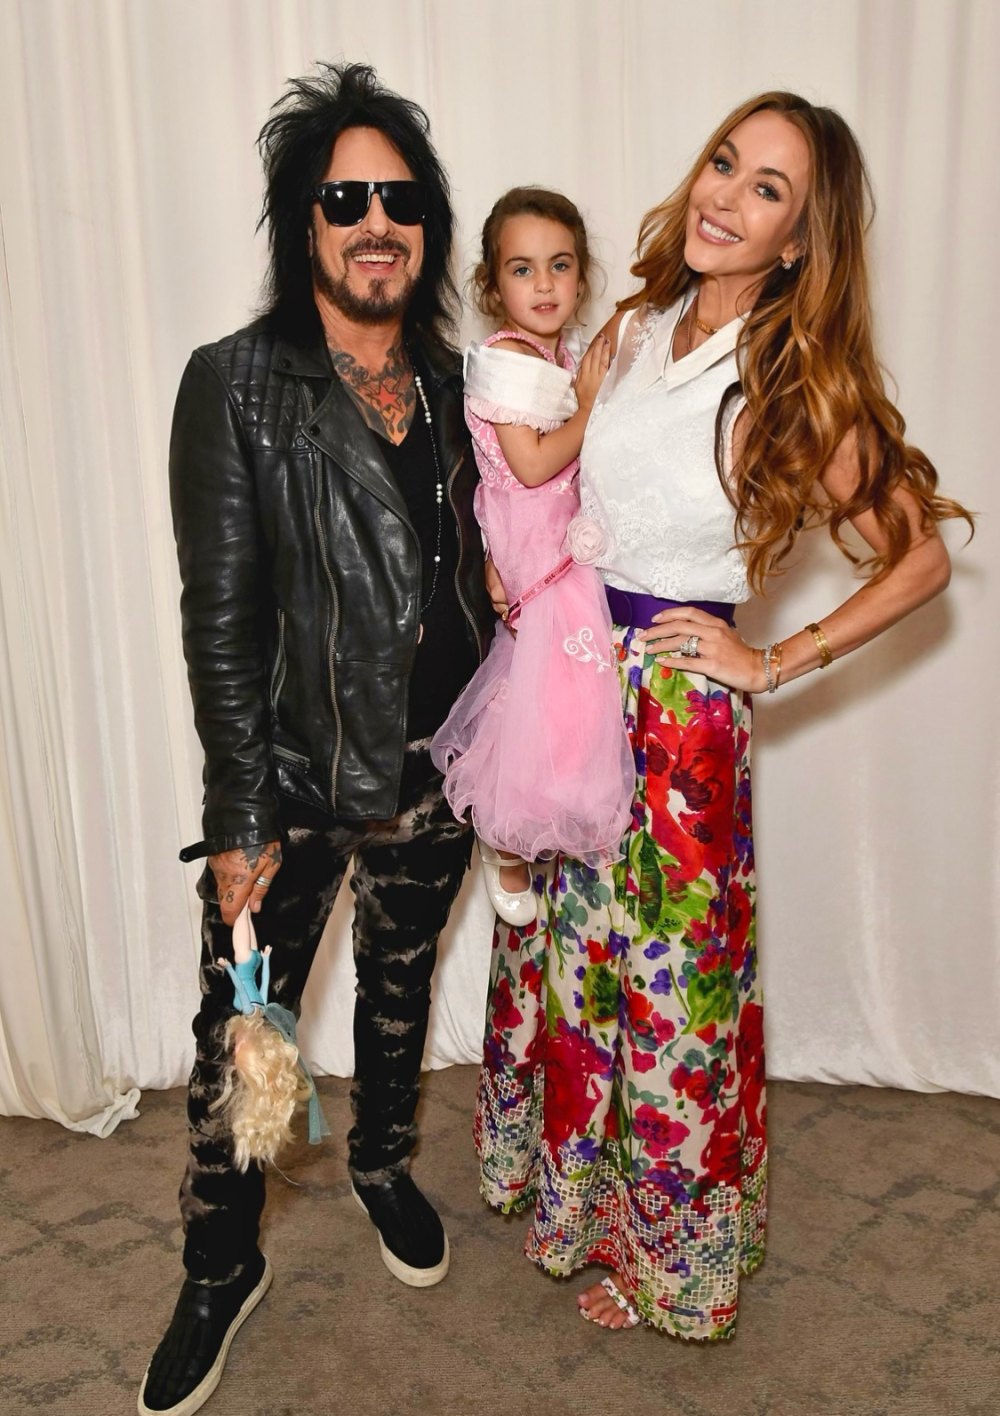 Nikki Sixx and Wife Courtney Are Raising Daughter to Be Cowgirl Tough